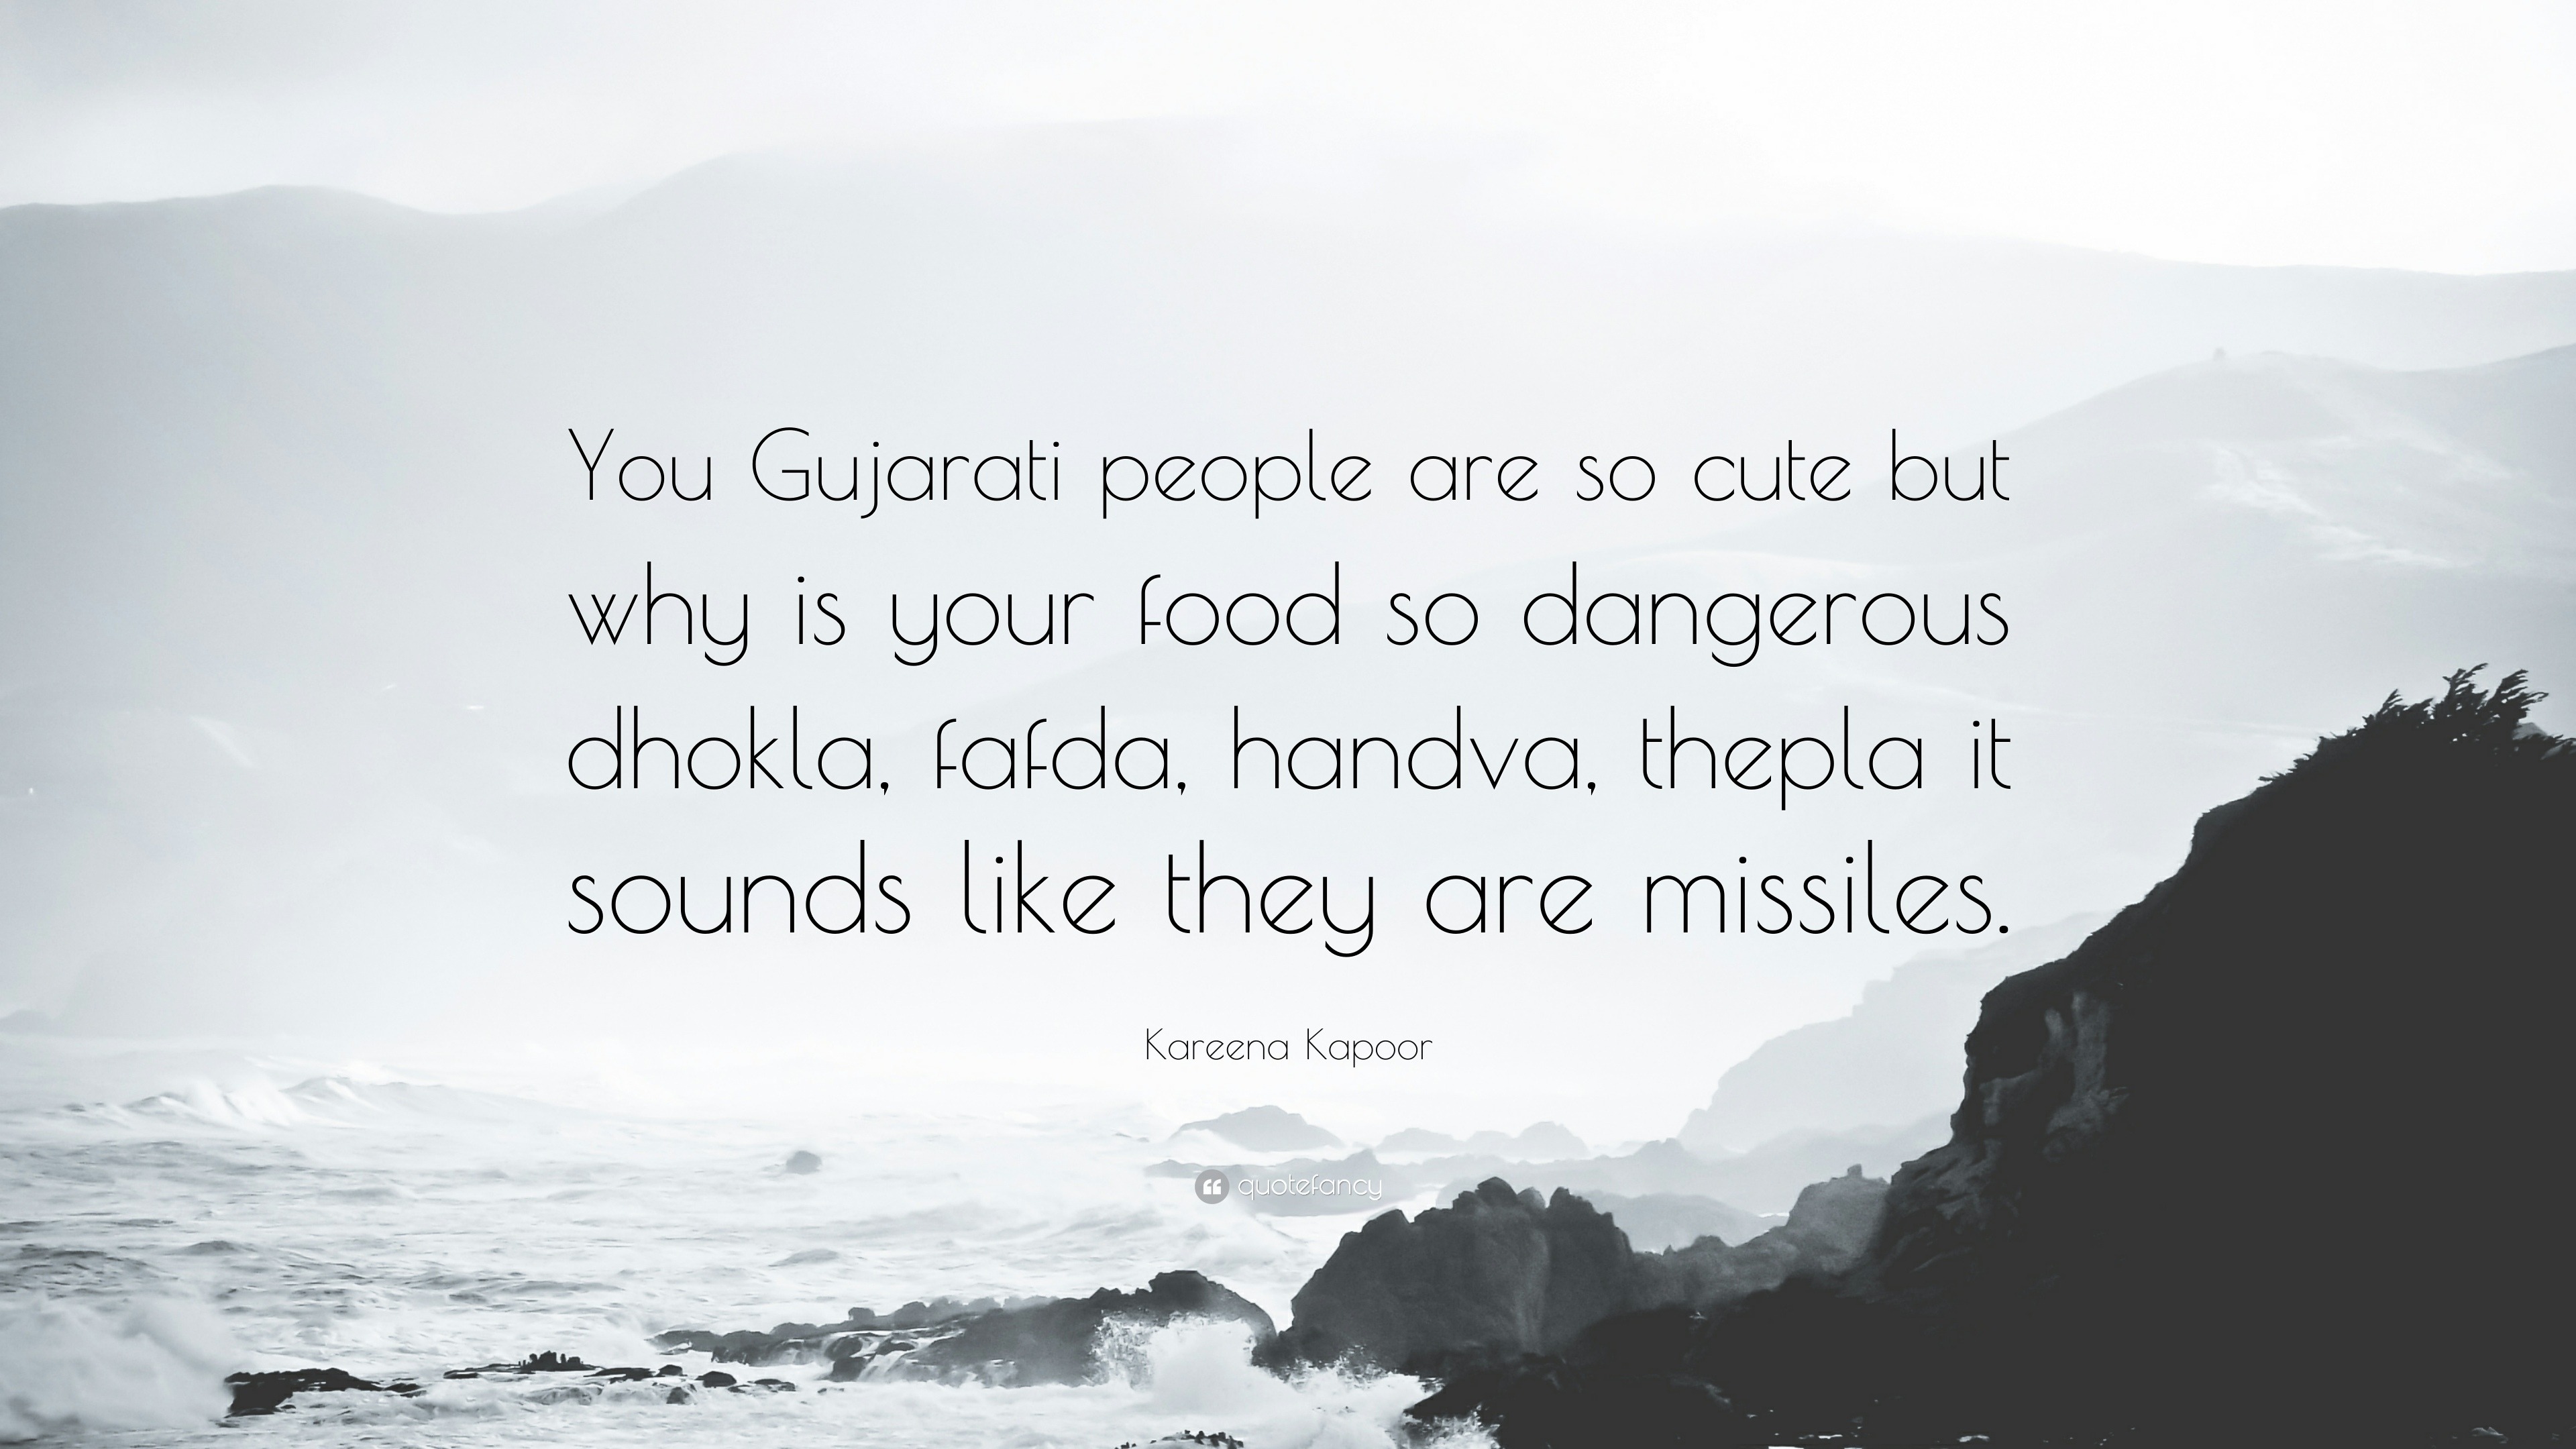 Kareena Kapoor Quote: “You Gujarati people are so cute but why is ...